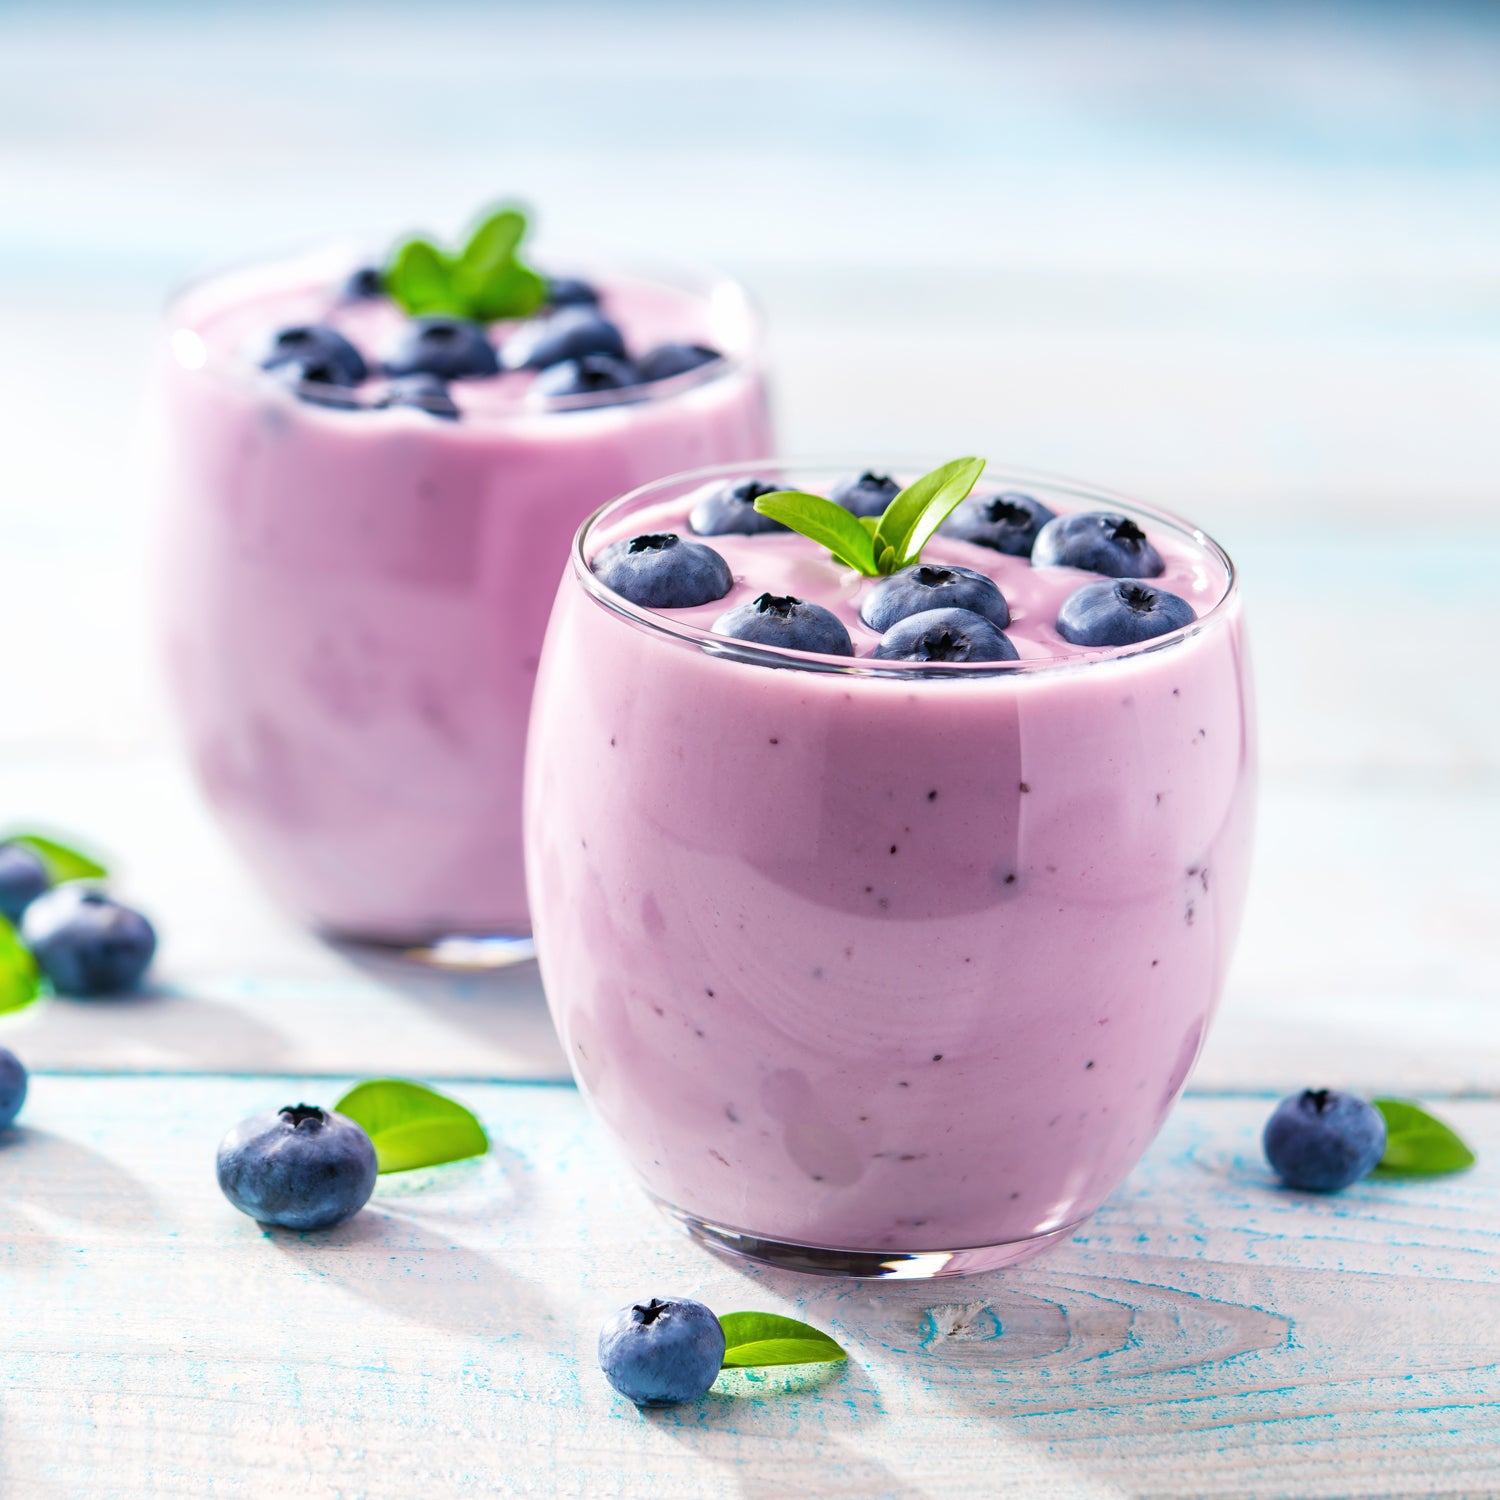 5 Breakfast Smoothies To Support An Athletic Lifestyle